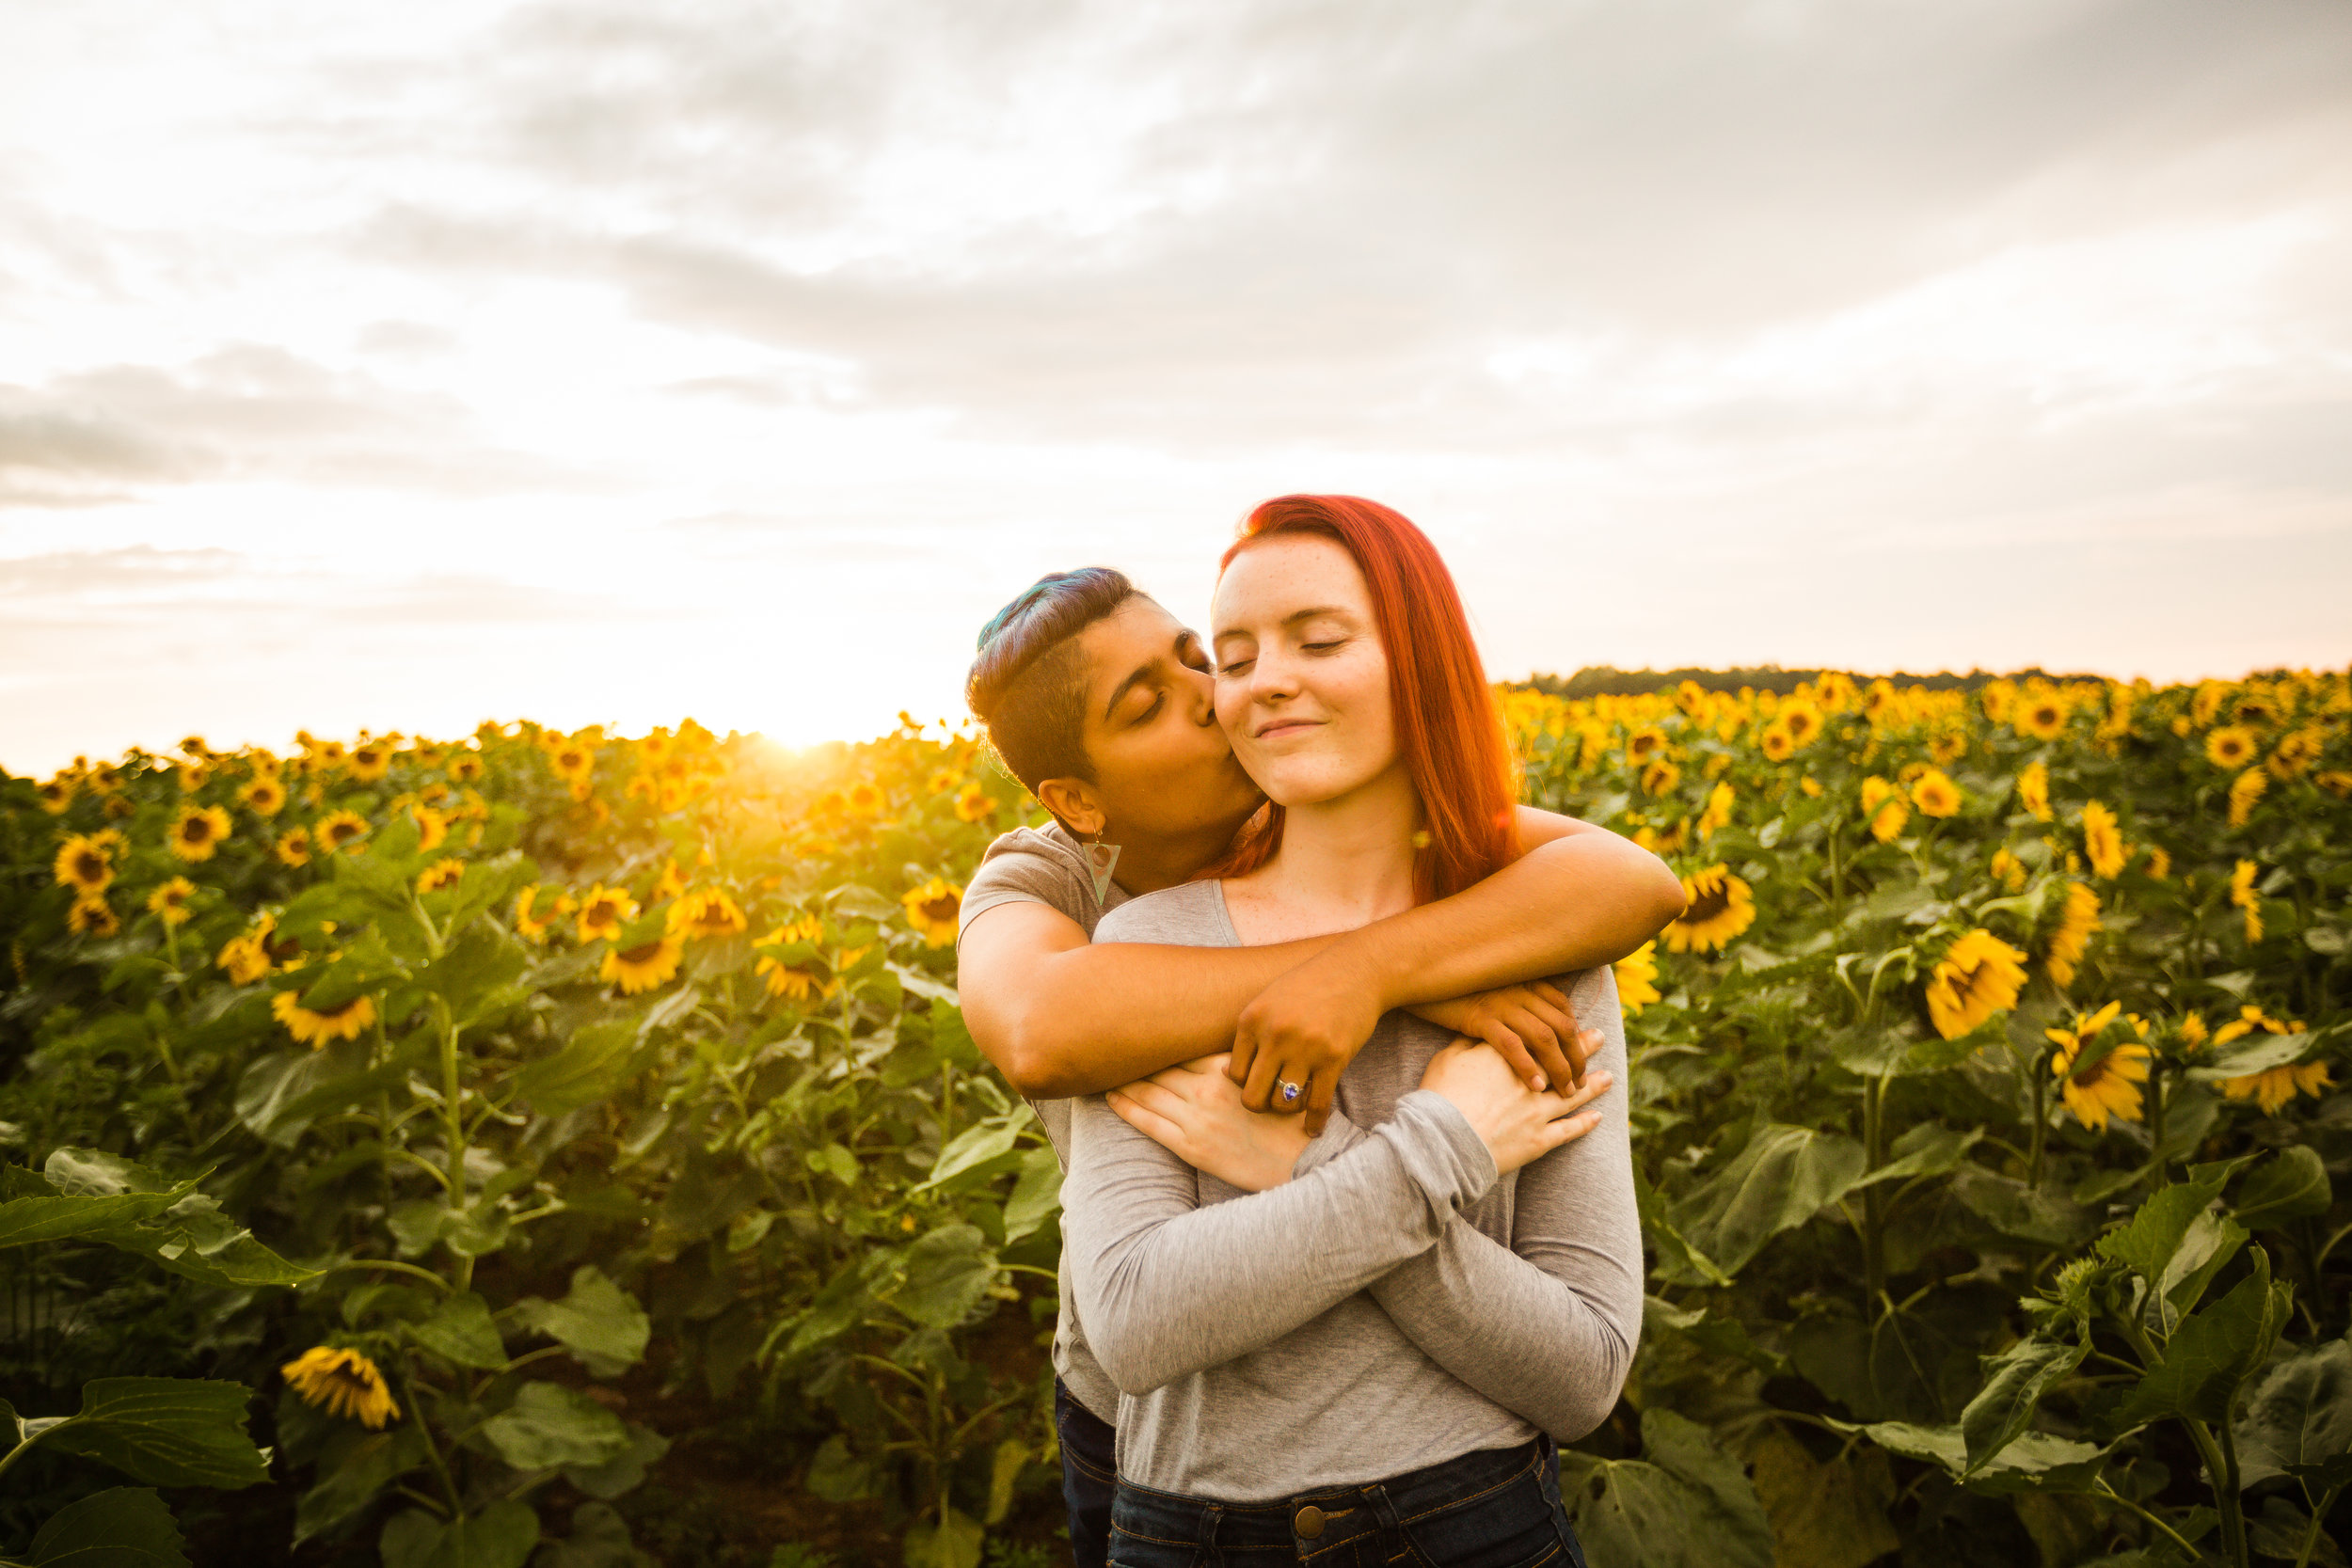 Clyde, New York Sunflower Engagement Session | Mitalee &amp; Kelly 